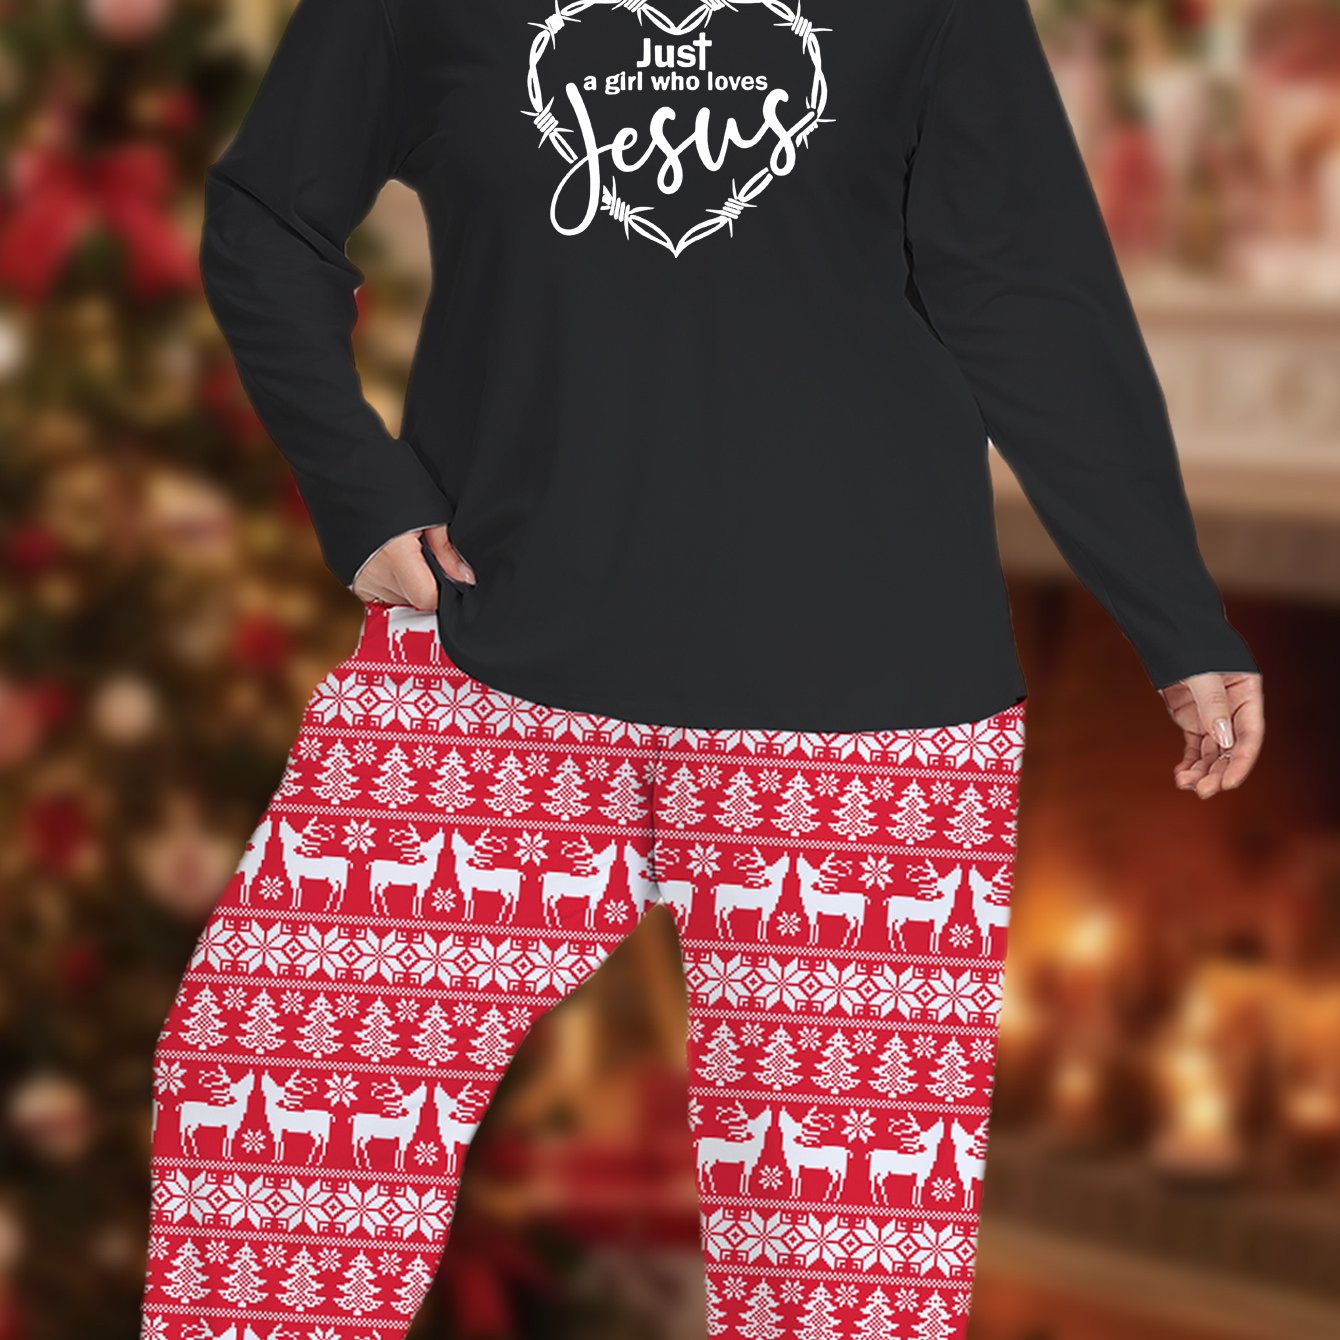 Just A Girl Who Loves Jesus Plus Size (Christmas Themed) Women's Christian Pajamas claimedbygoddesigns